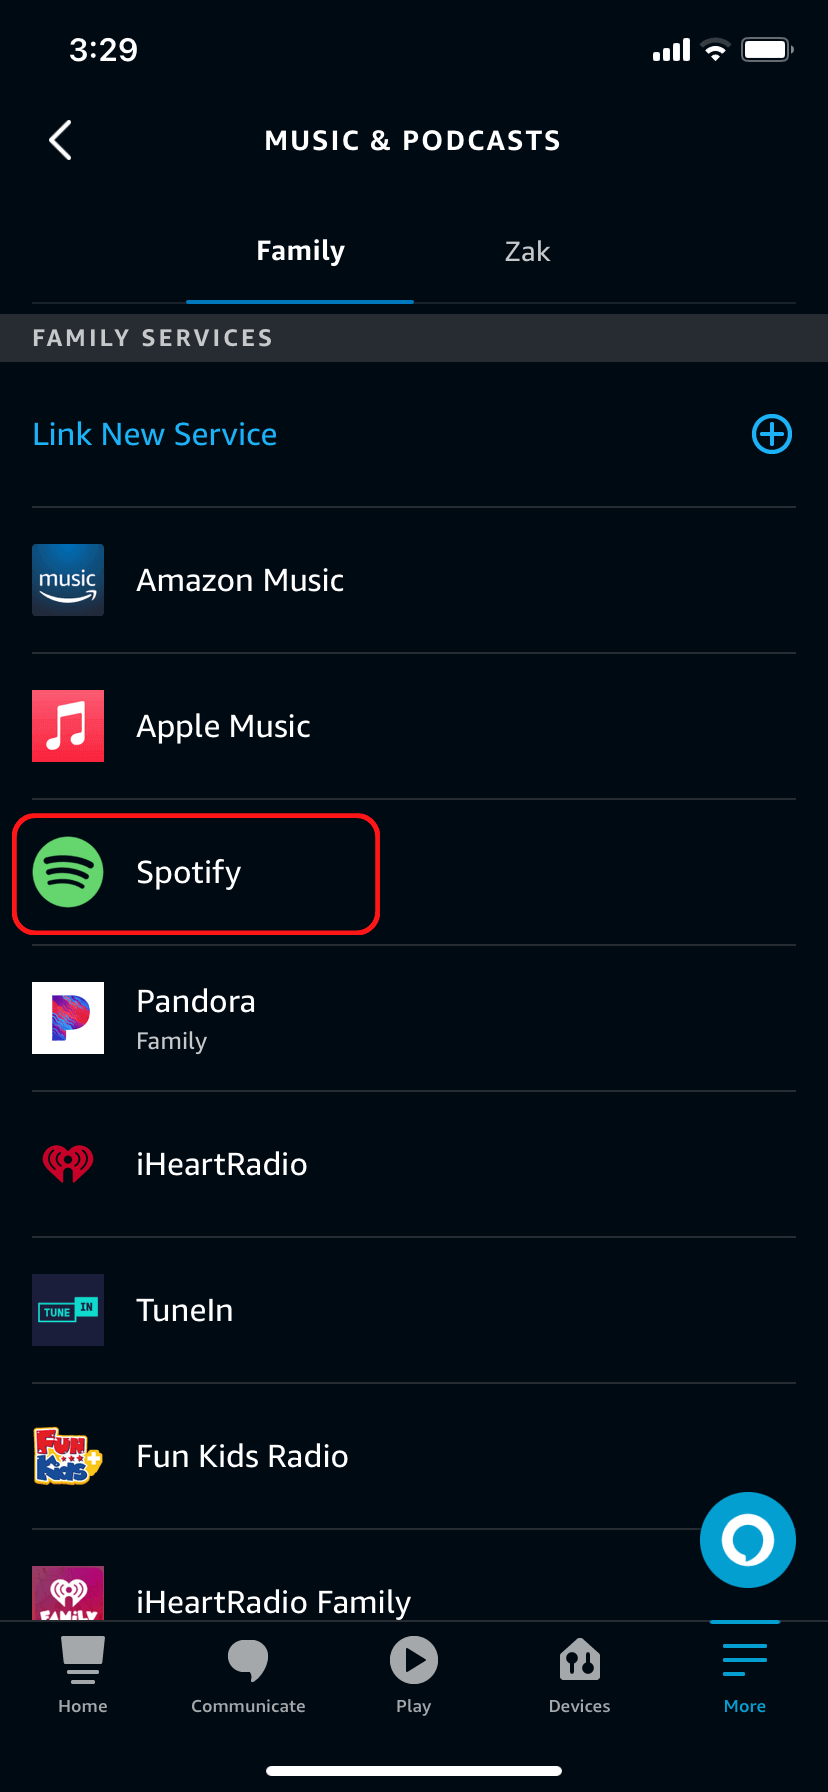 Selecting Spotify from the Music & Podcasts menu in the Alexa app